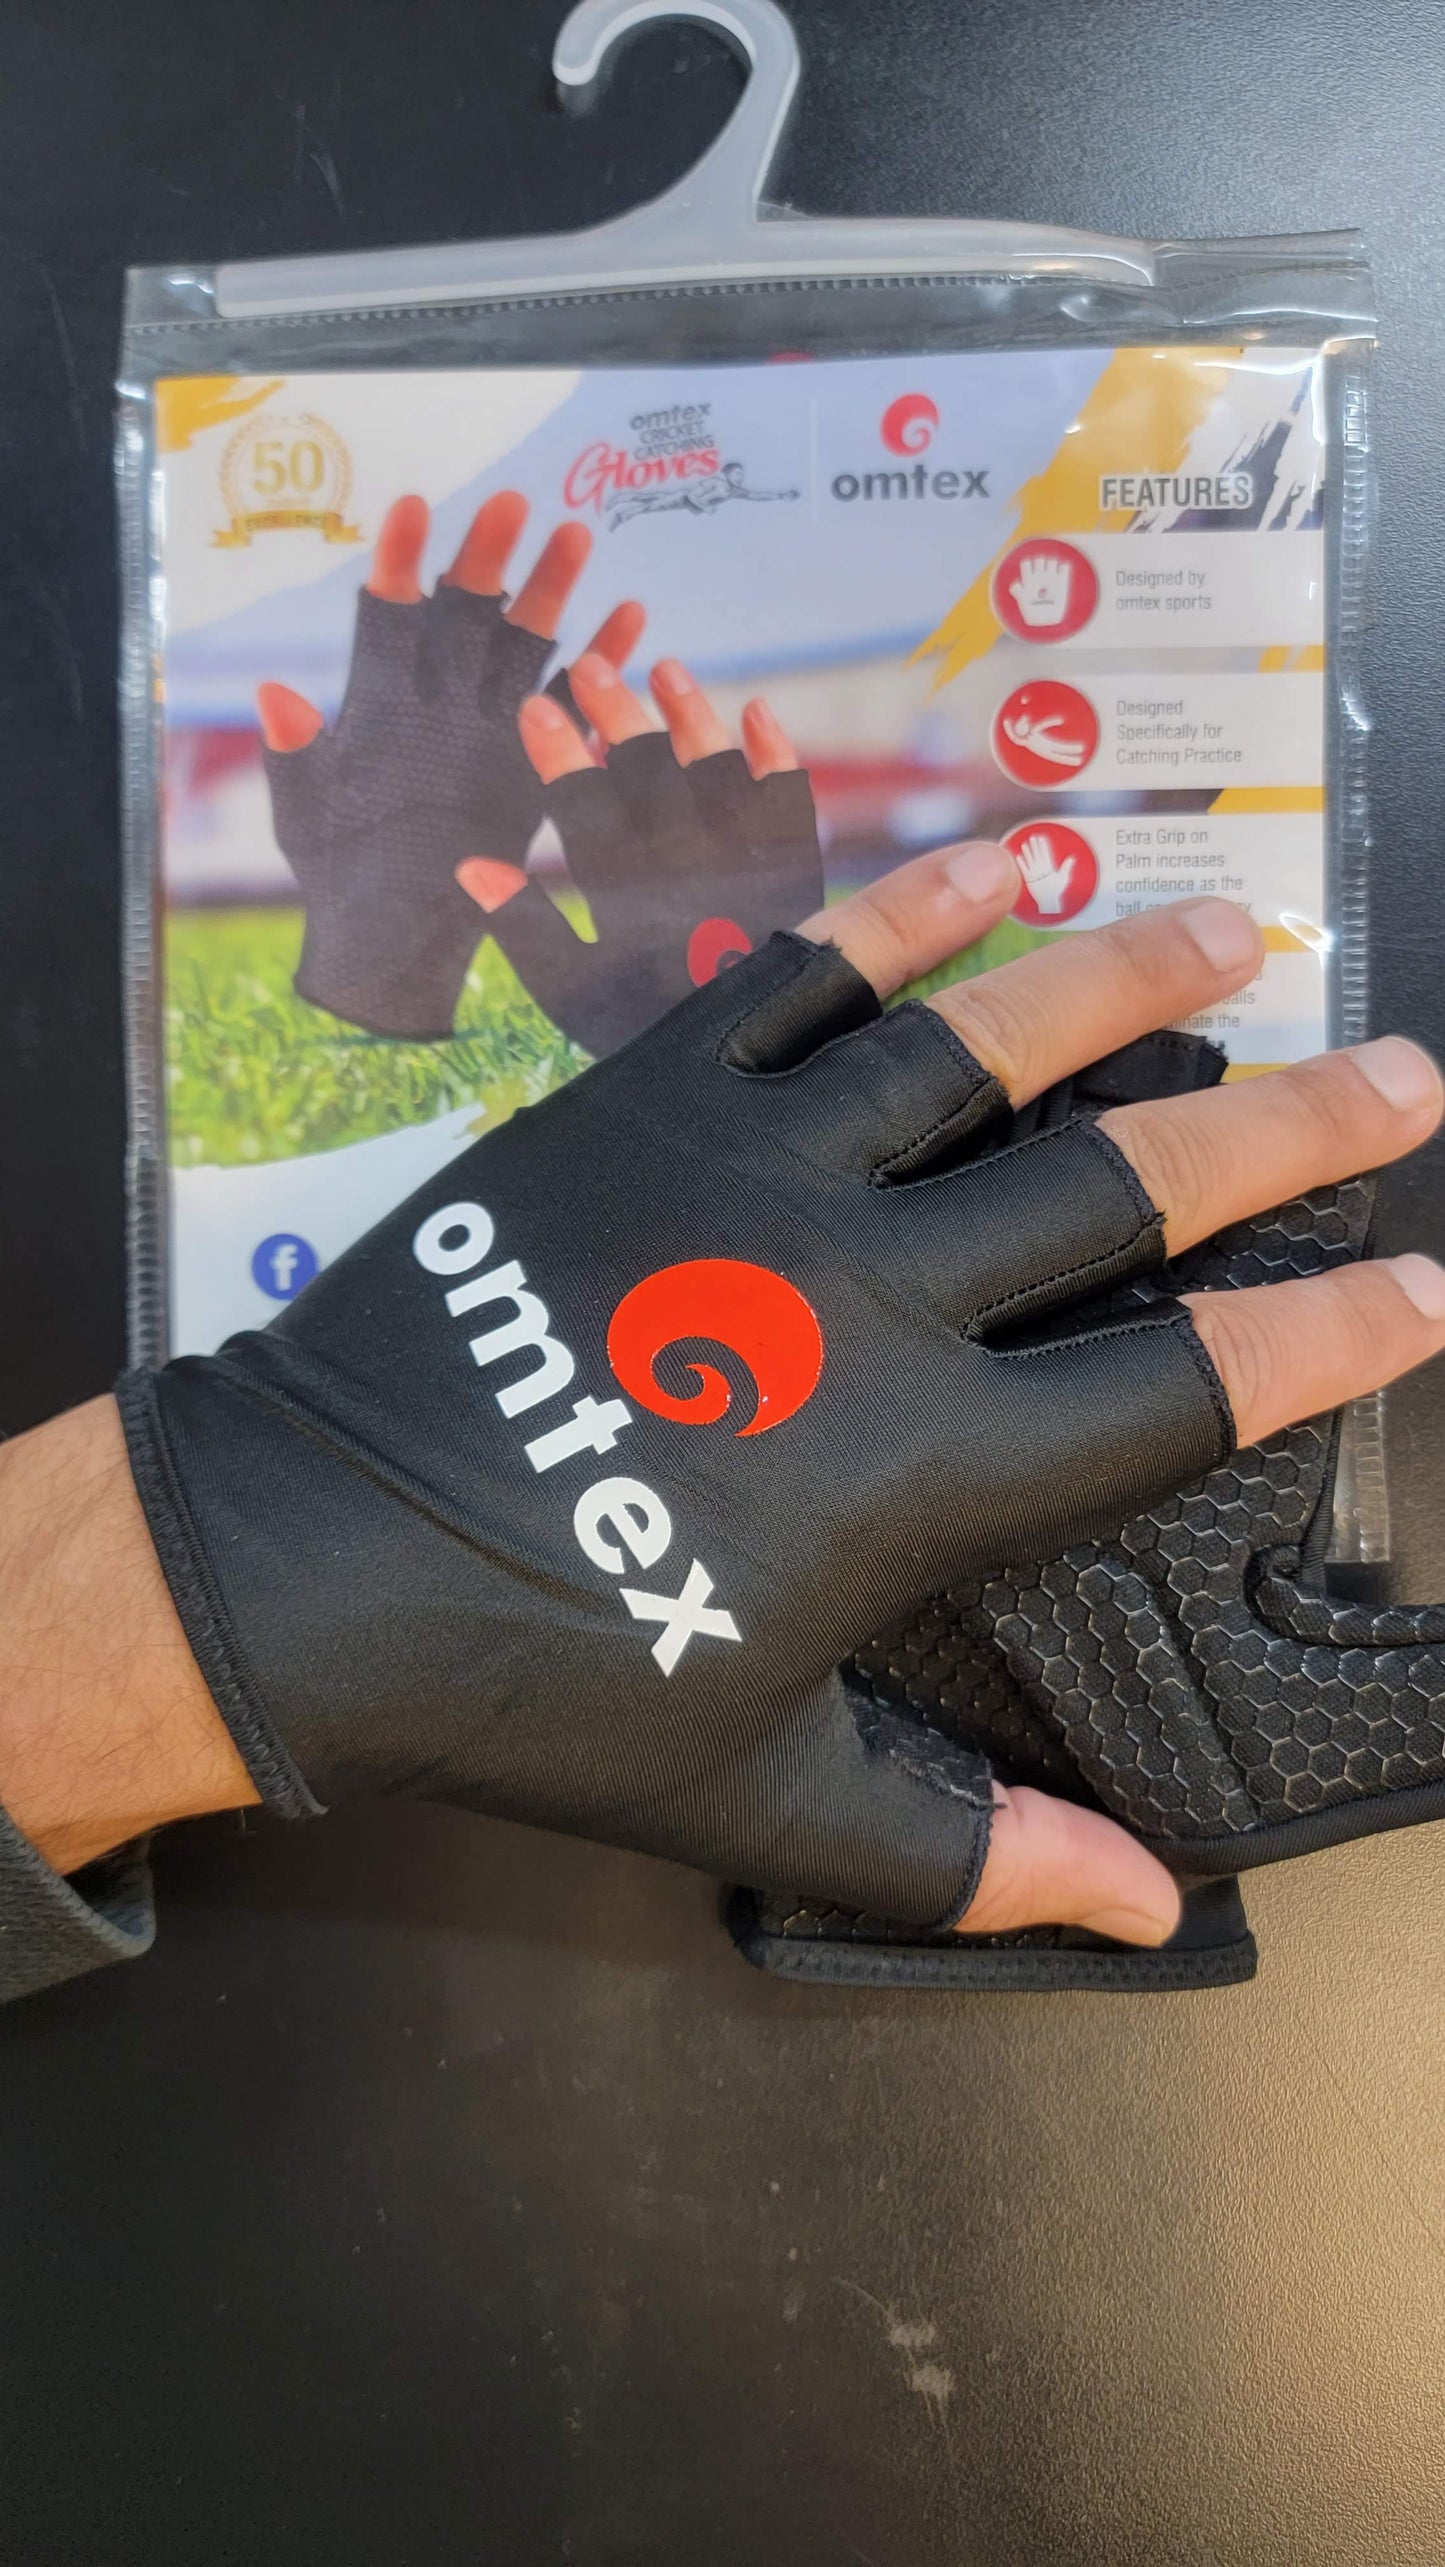 Cricket catching gloves 2.0 Omtex